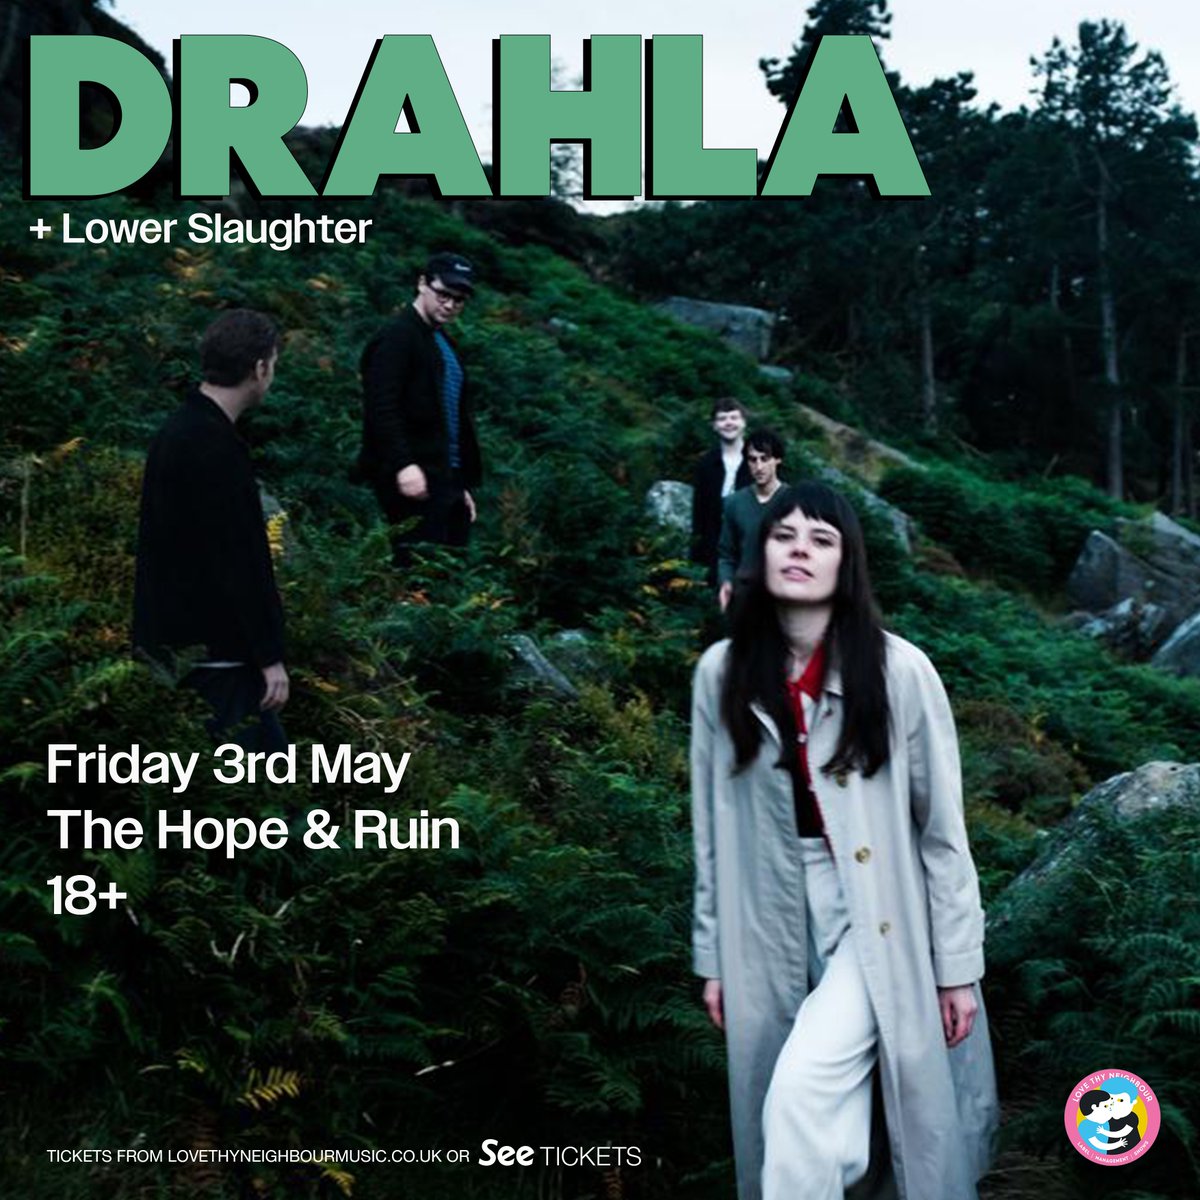 💿TONIGHT💿 The uncompromising live force of Drahla - Last chance to grab tickets for tonight!! STAGE TIMES: @lowerslaughter_ - 8:30pm - 9:00pm Drahla - 9:30pm - 10:45pm DOORS: 8:00pm 📅03.05.24 🏫@thehopeandruin 🎟seetickets.com/event/drahla/t… - UNTIL 6pm, limited on the door!